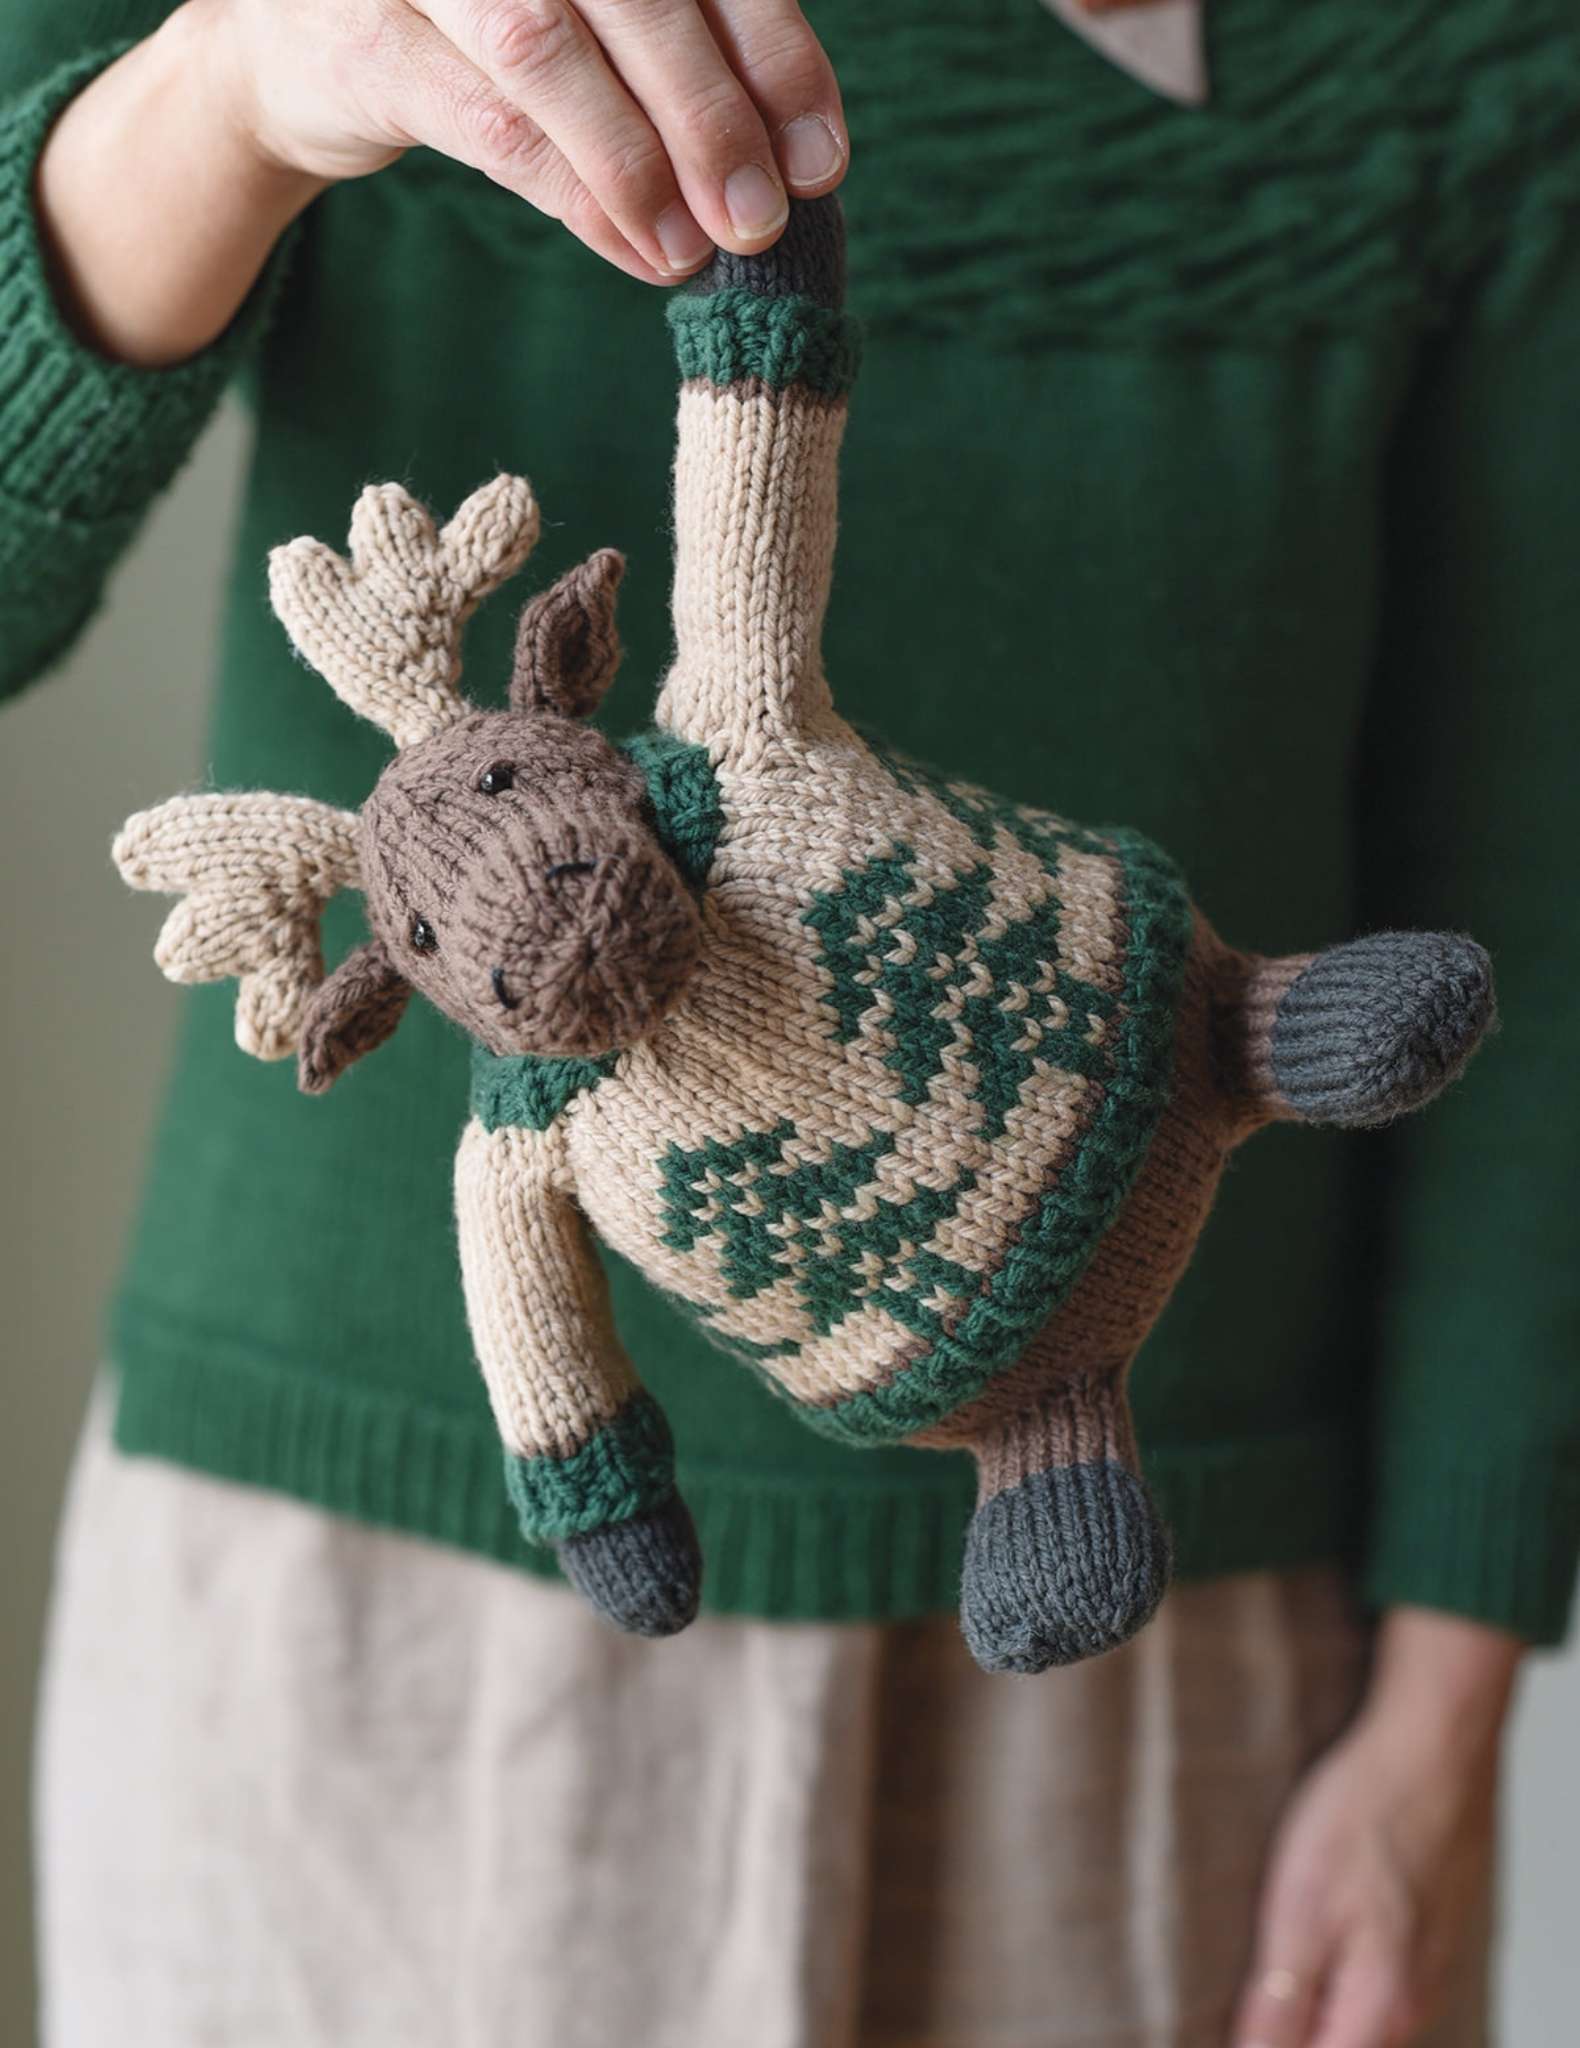 A knitted toy moose is hanging down in front of a model, being held by one arm. The moose wears a colourwork sweater with a tree motif. The model has white hands and is wearing a green sweater.